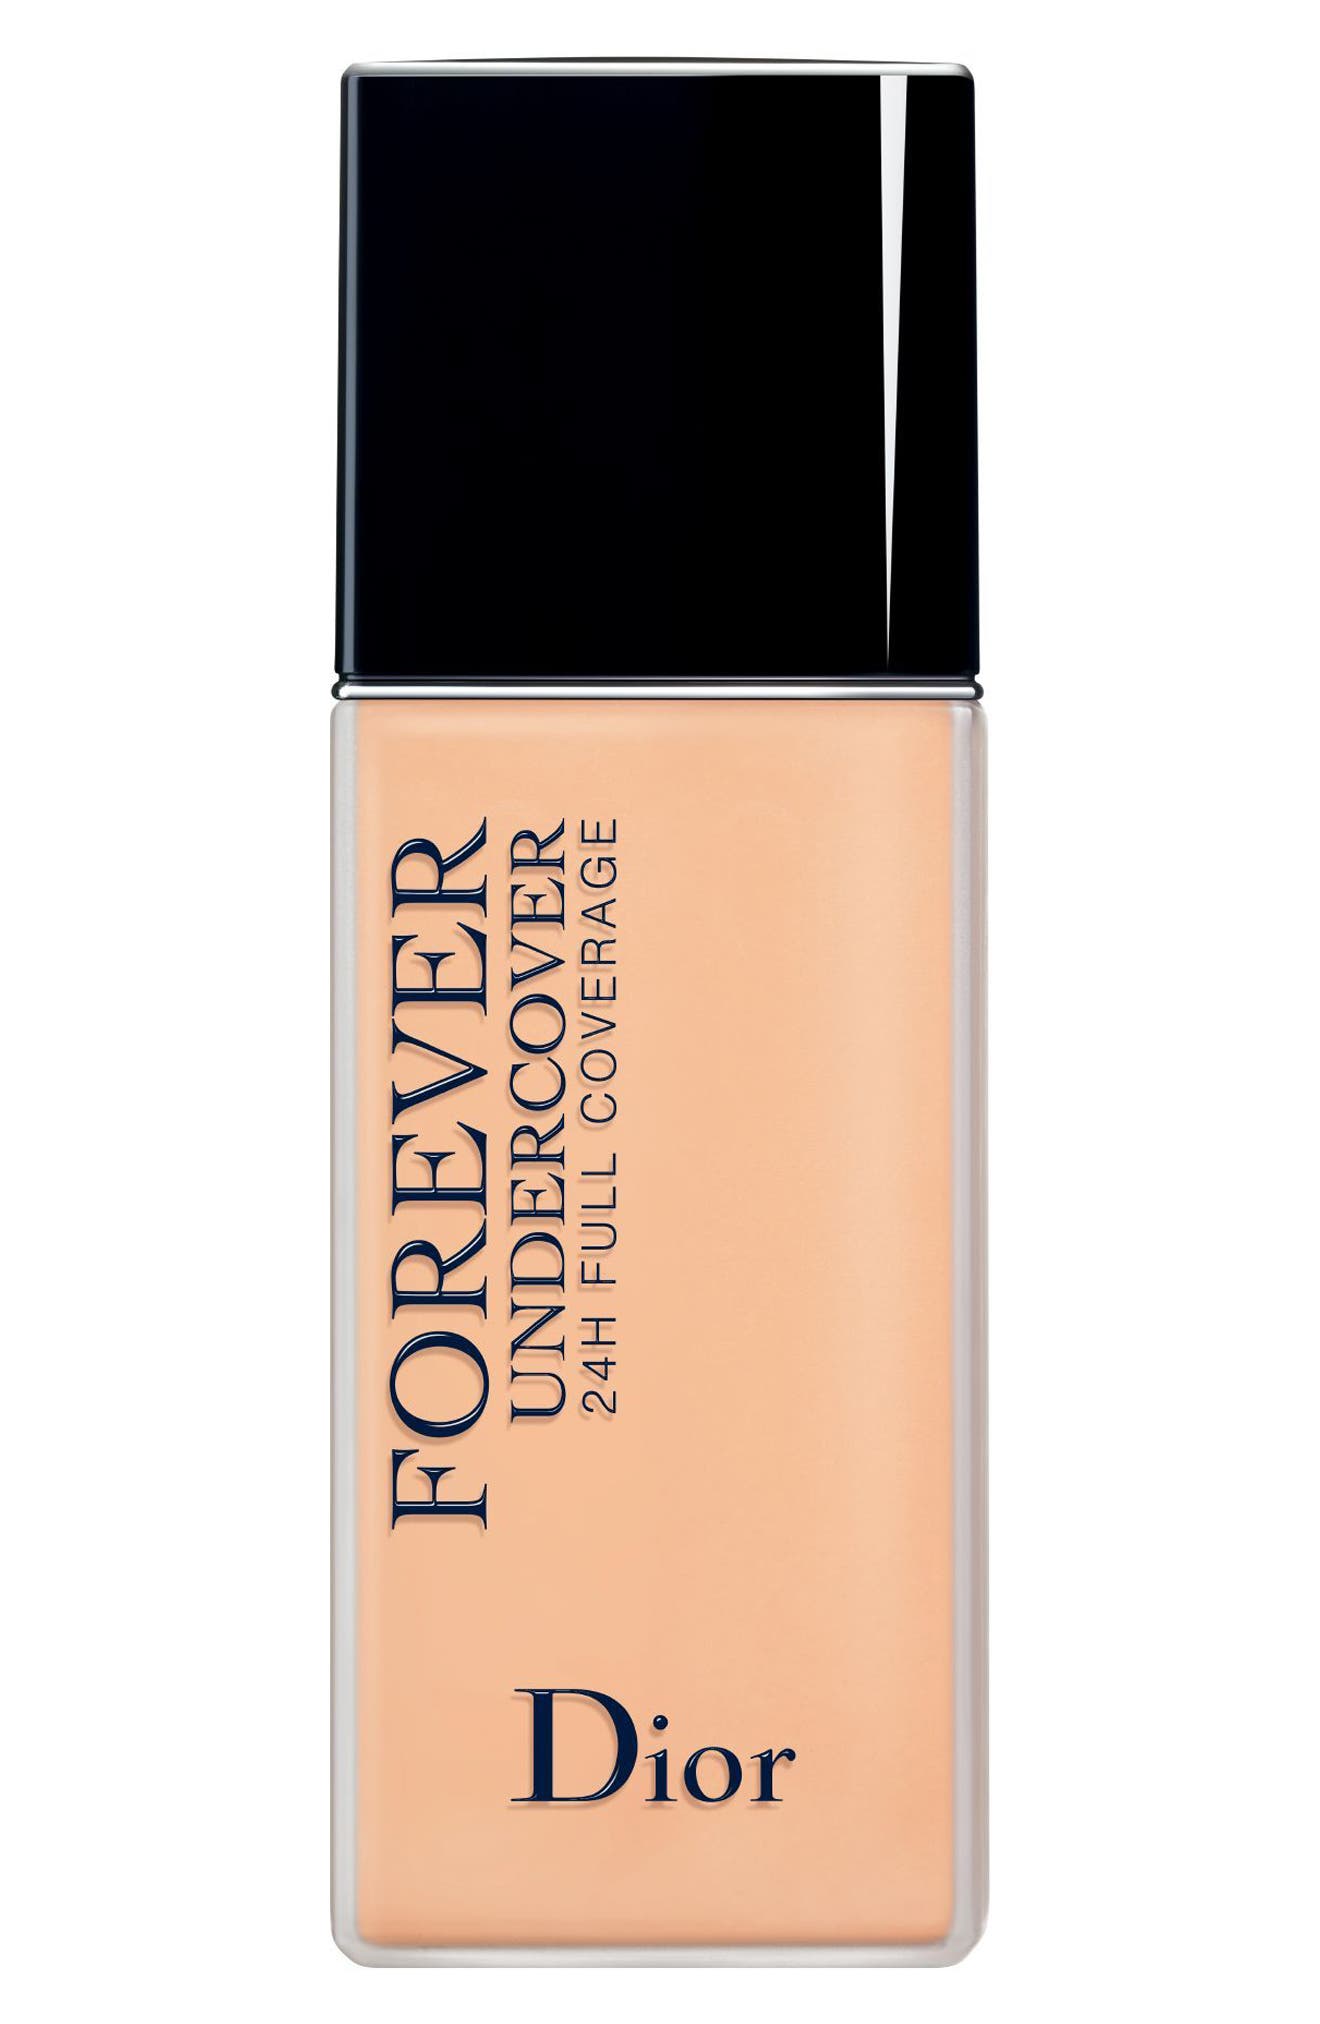 EAN 3348901383547 product image for Dior Diorskin Forever Undercover 24-Hour Full Coverage Liquid Foundation - 023 P | upcitemdb.com